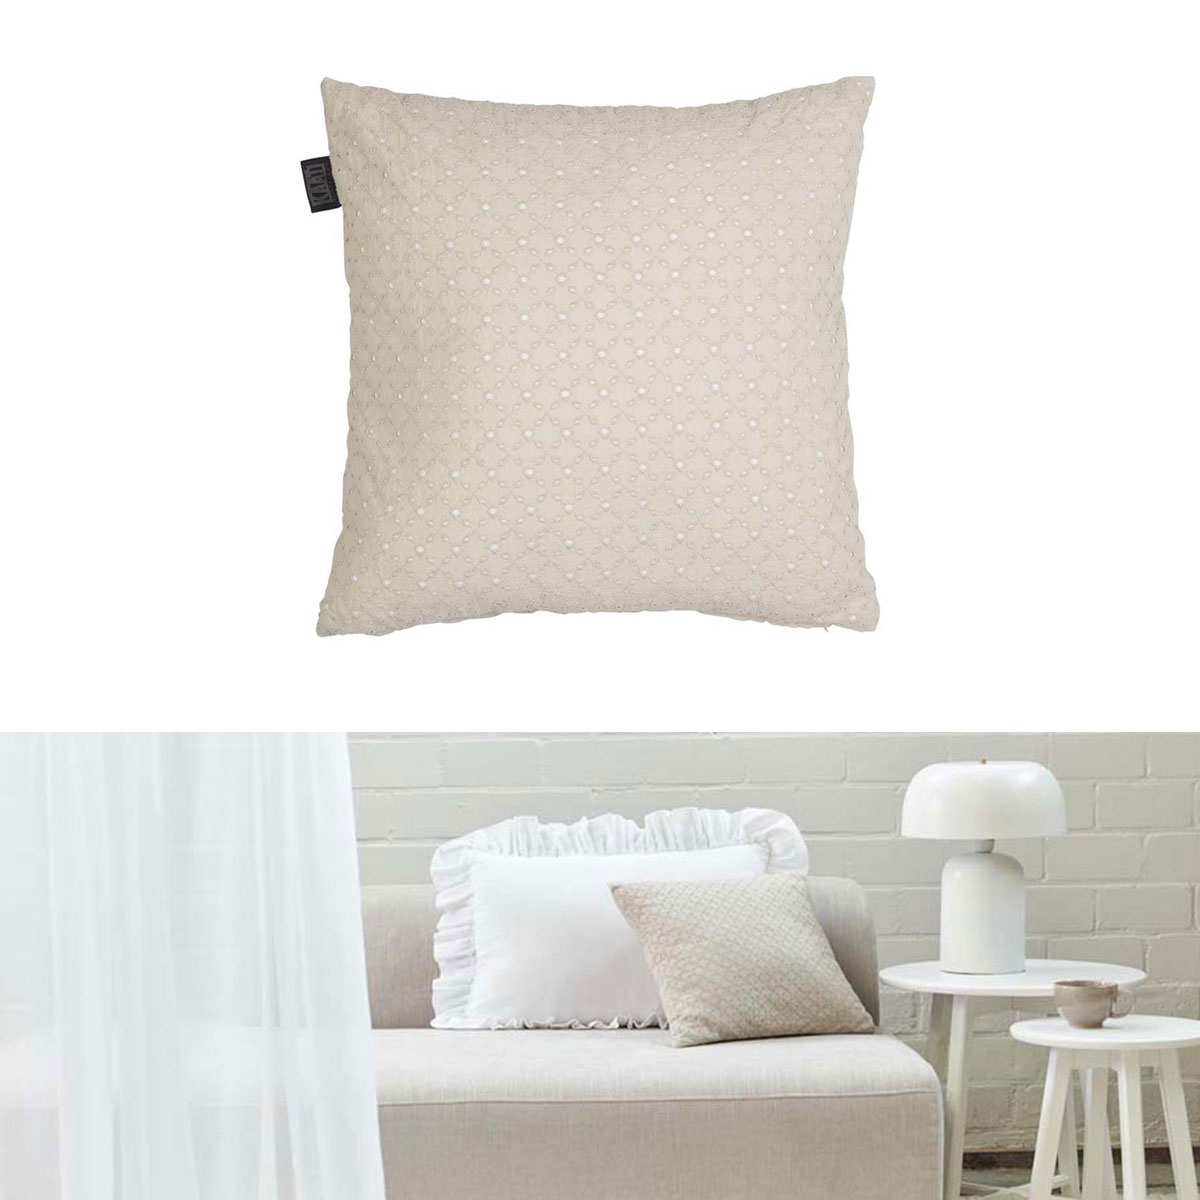 Bedding House Chelsy Square Filled Cushion 40cm x 40cm